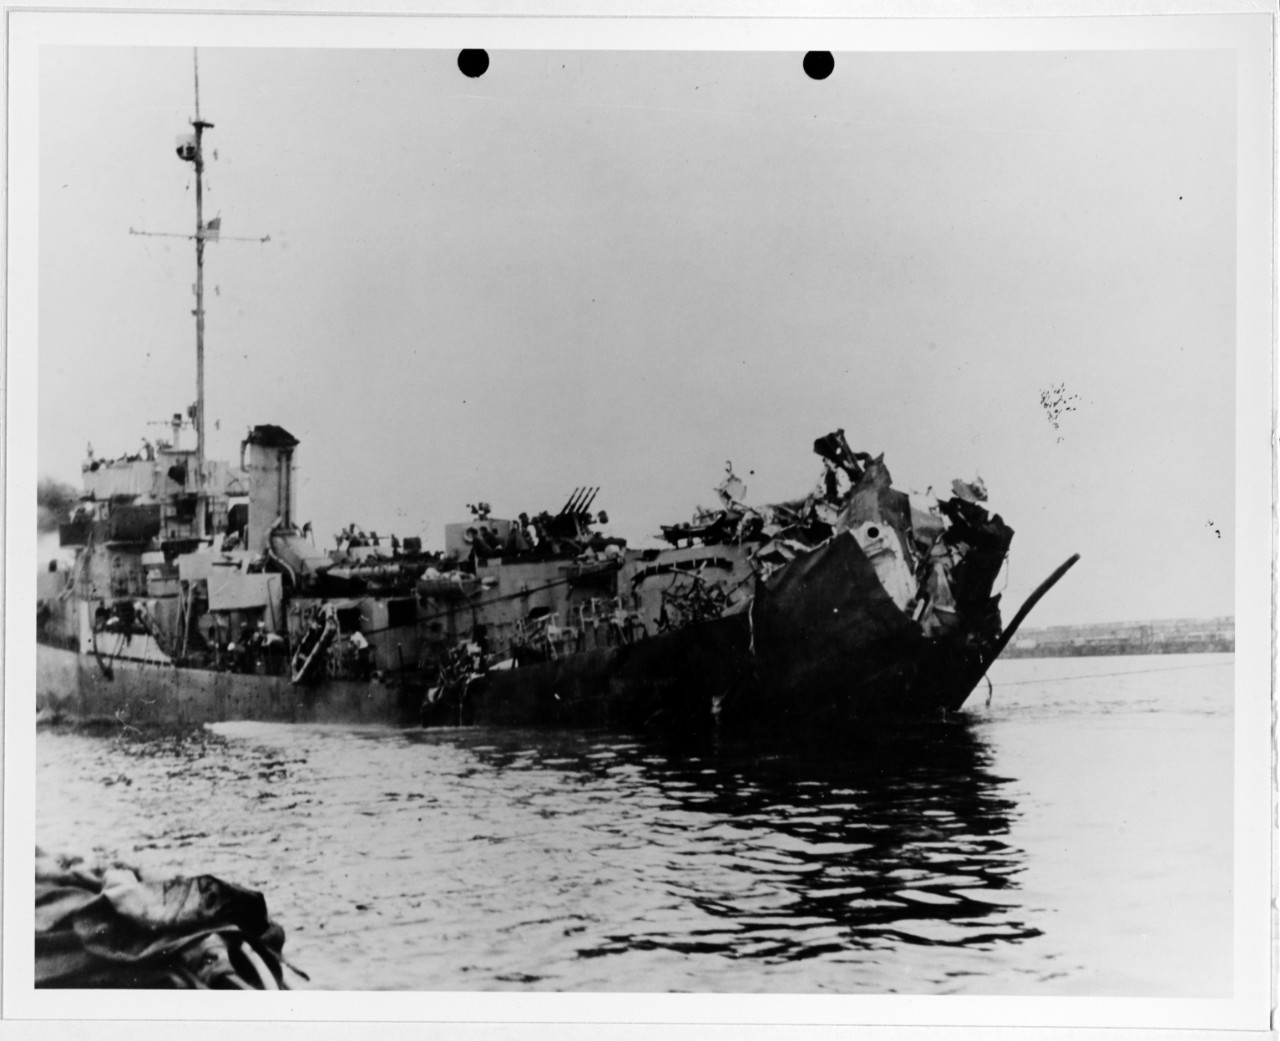 USS BARR after torpedo hit in stern